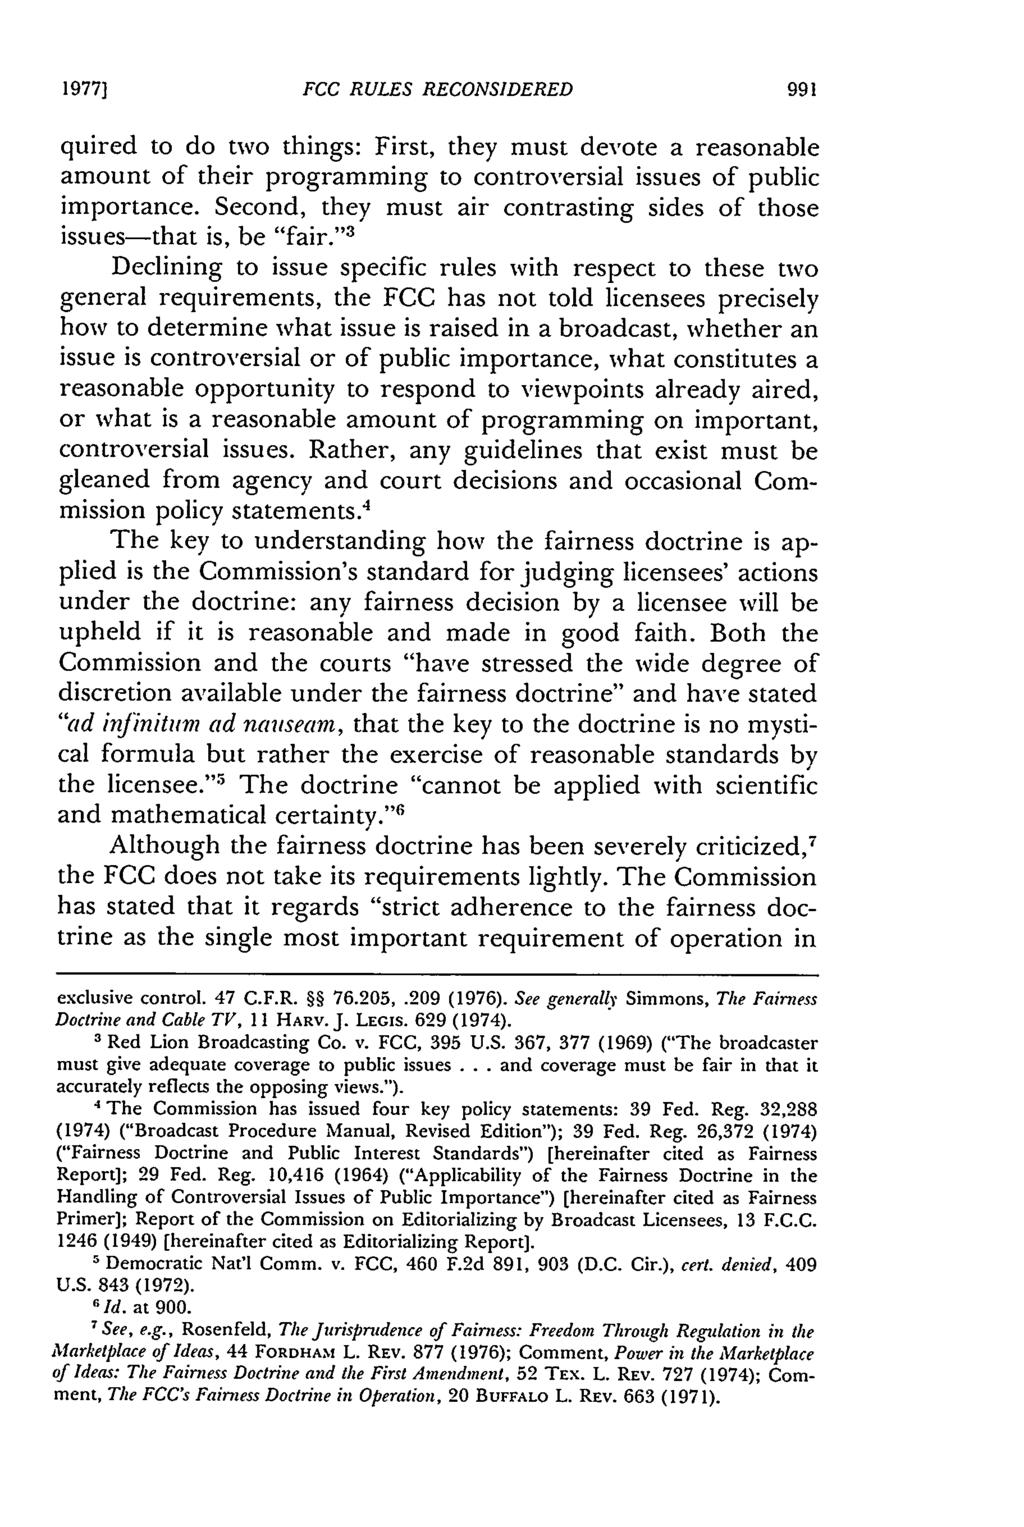 19771 FCC RULES RECONSIDERED quired to do two things: First, they must devote a reasonable amount of their programming to controversial issues of public importance.